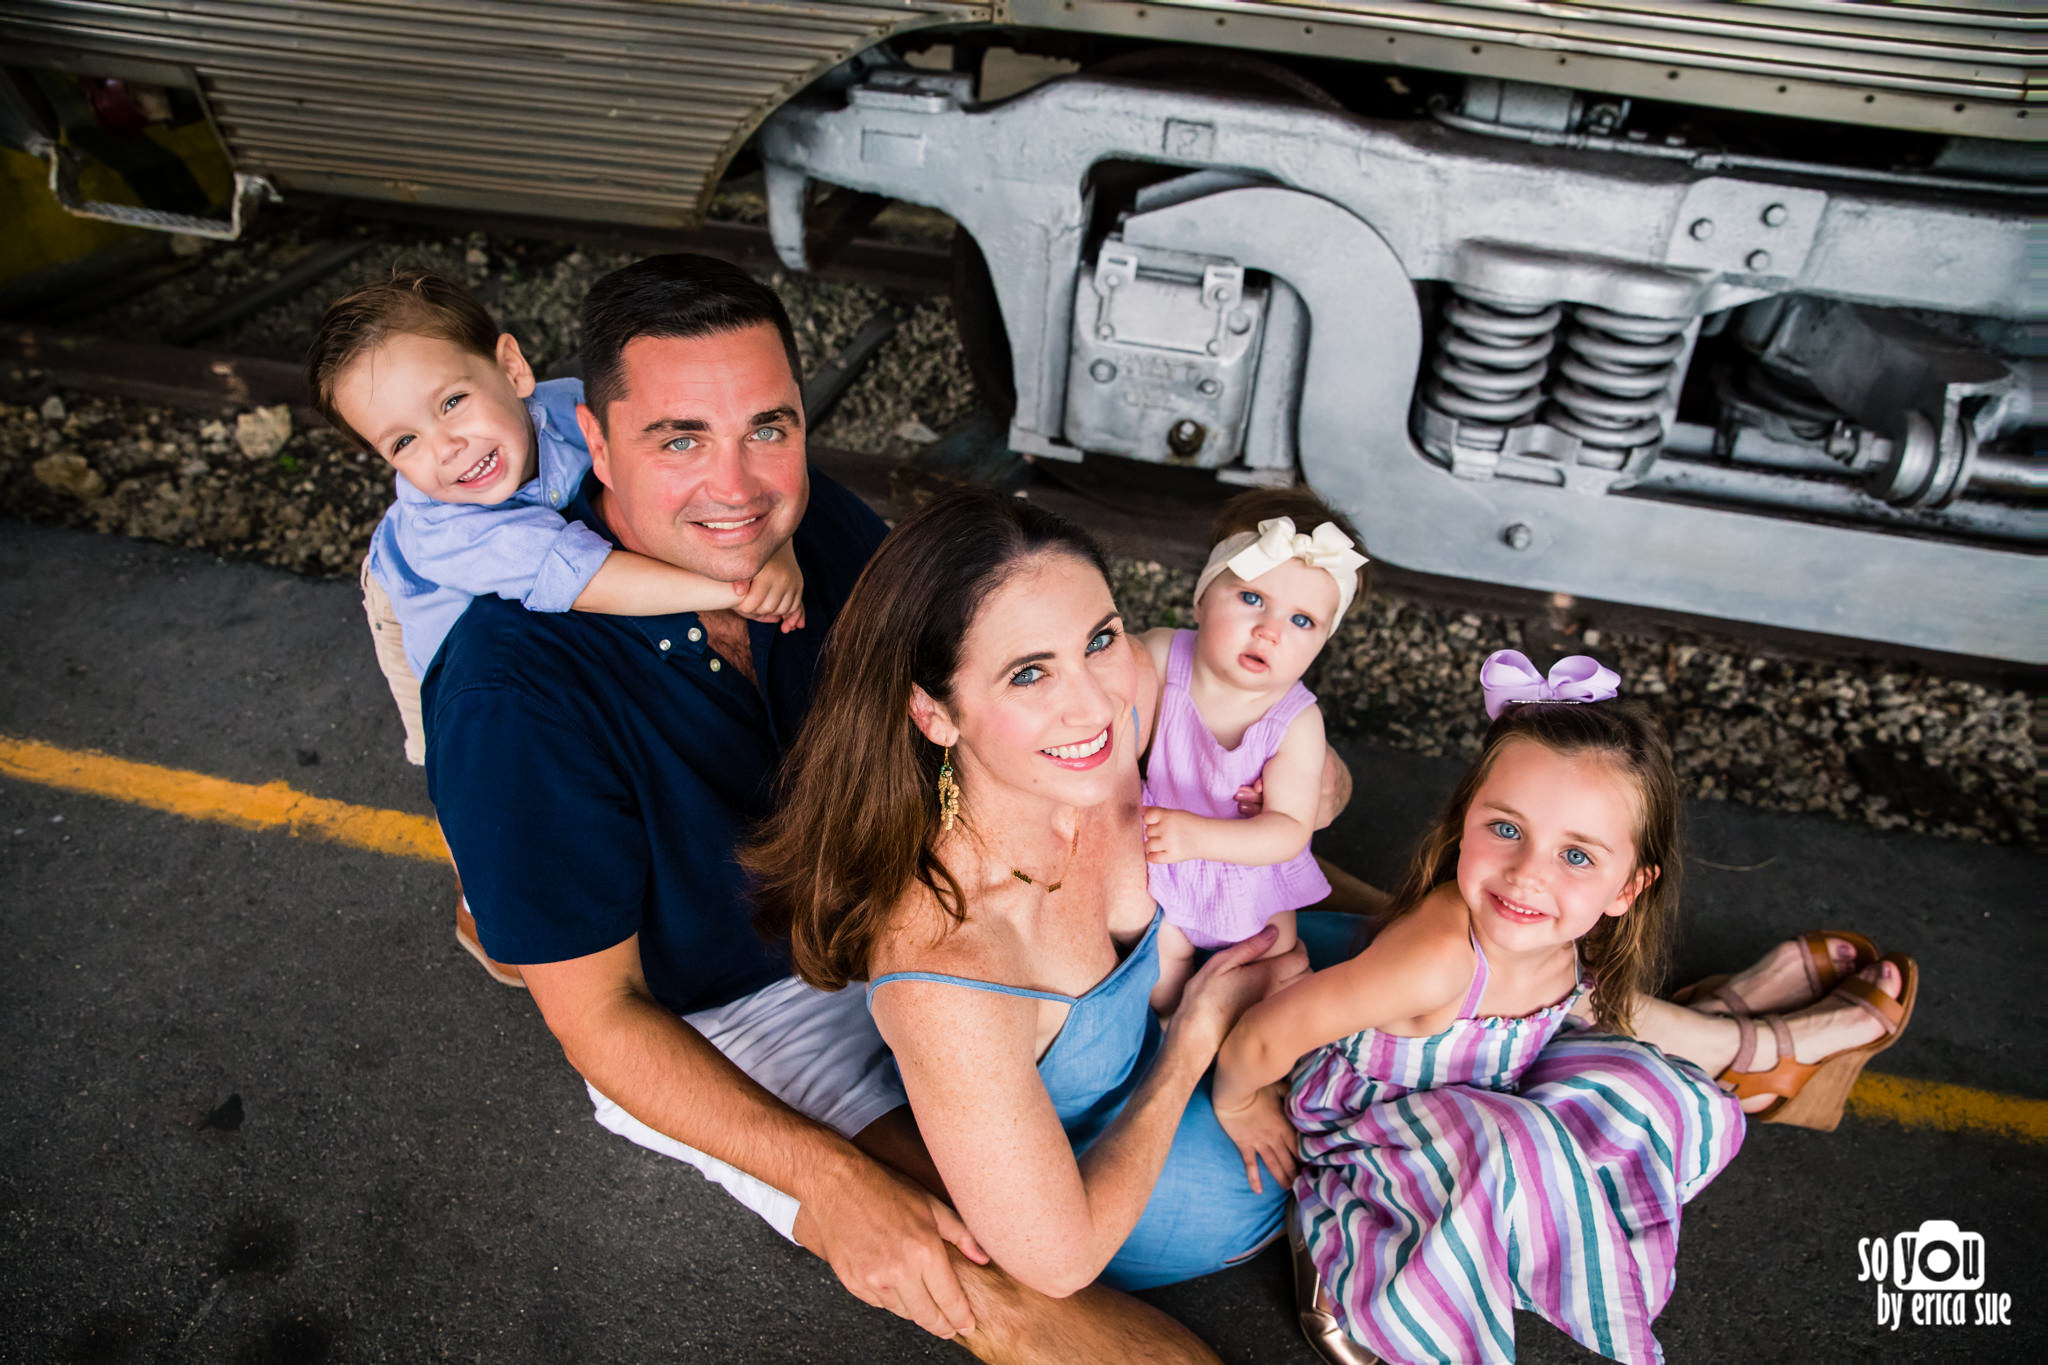 so-you-by-erica-sue-gold-coast-railroad-museum-miami-family-photo-shoot-session-.JPG